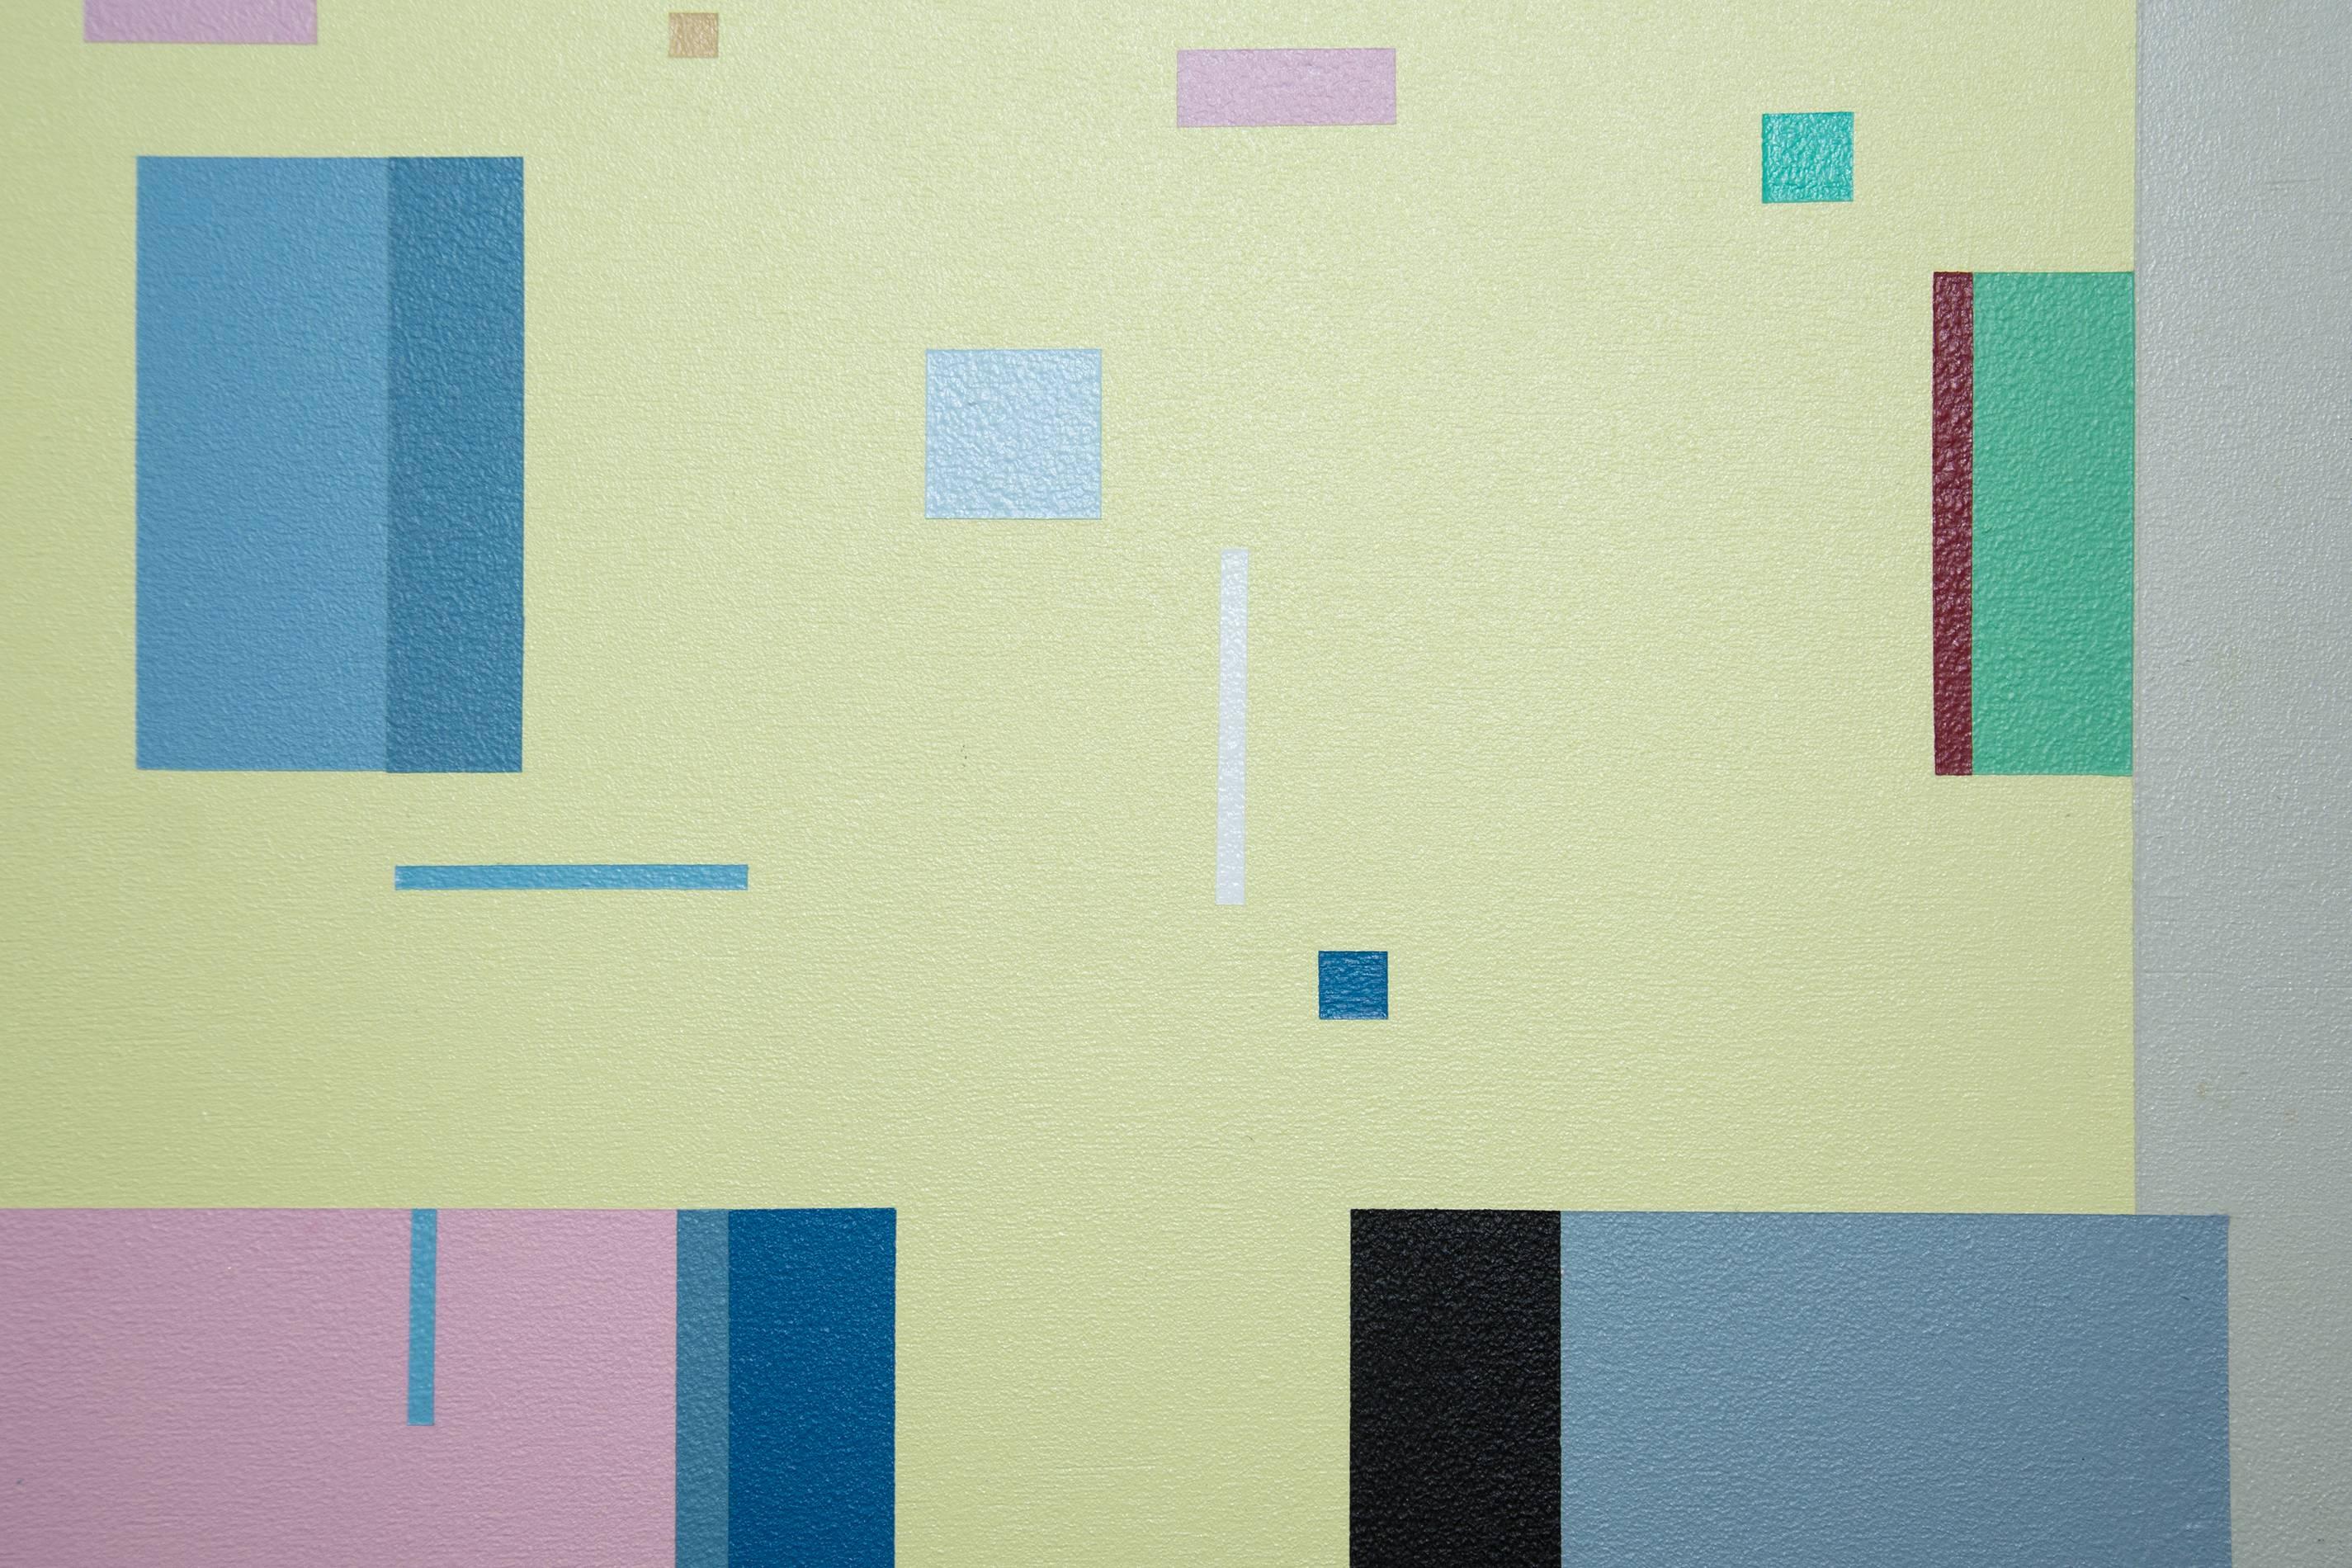 Kramer’s modern and graphic paintings express lyrical, geometric abstraction via a harmonic interplay of syncopated shapes of various sizes and colours. Trained at Yale University (MFA), The Institute of Design at the Illinois Institute of